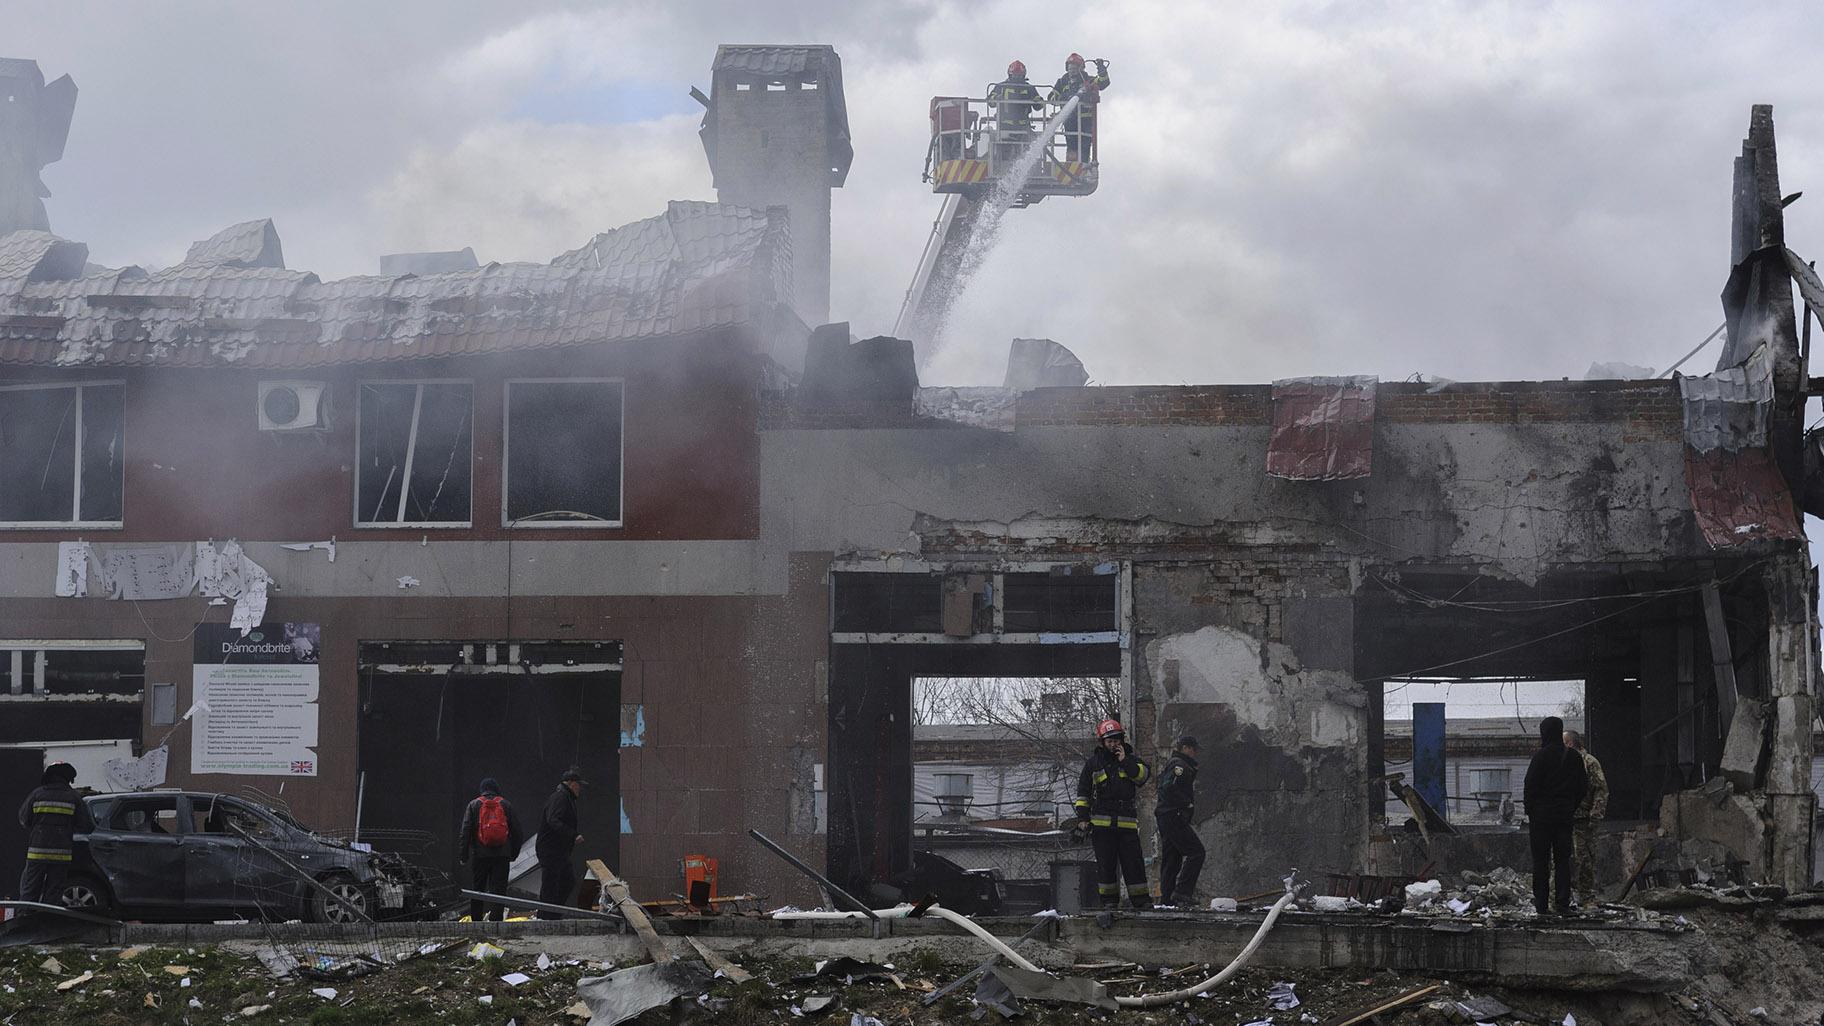 Firefighters work to extinguish a fire after an airstrike hit a tire shop in Lviv, Ukraine, Monday, April 18, 2022. (AP Photo / Mykola Tys)